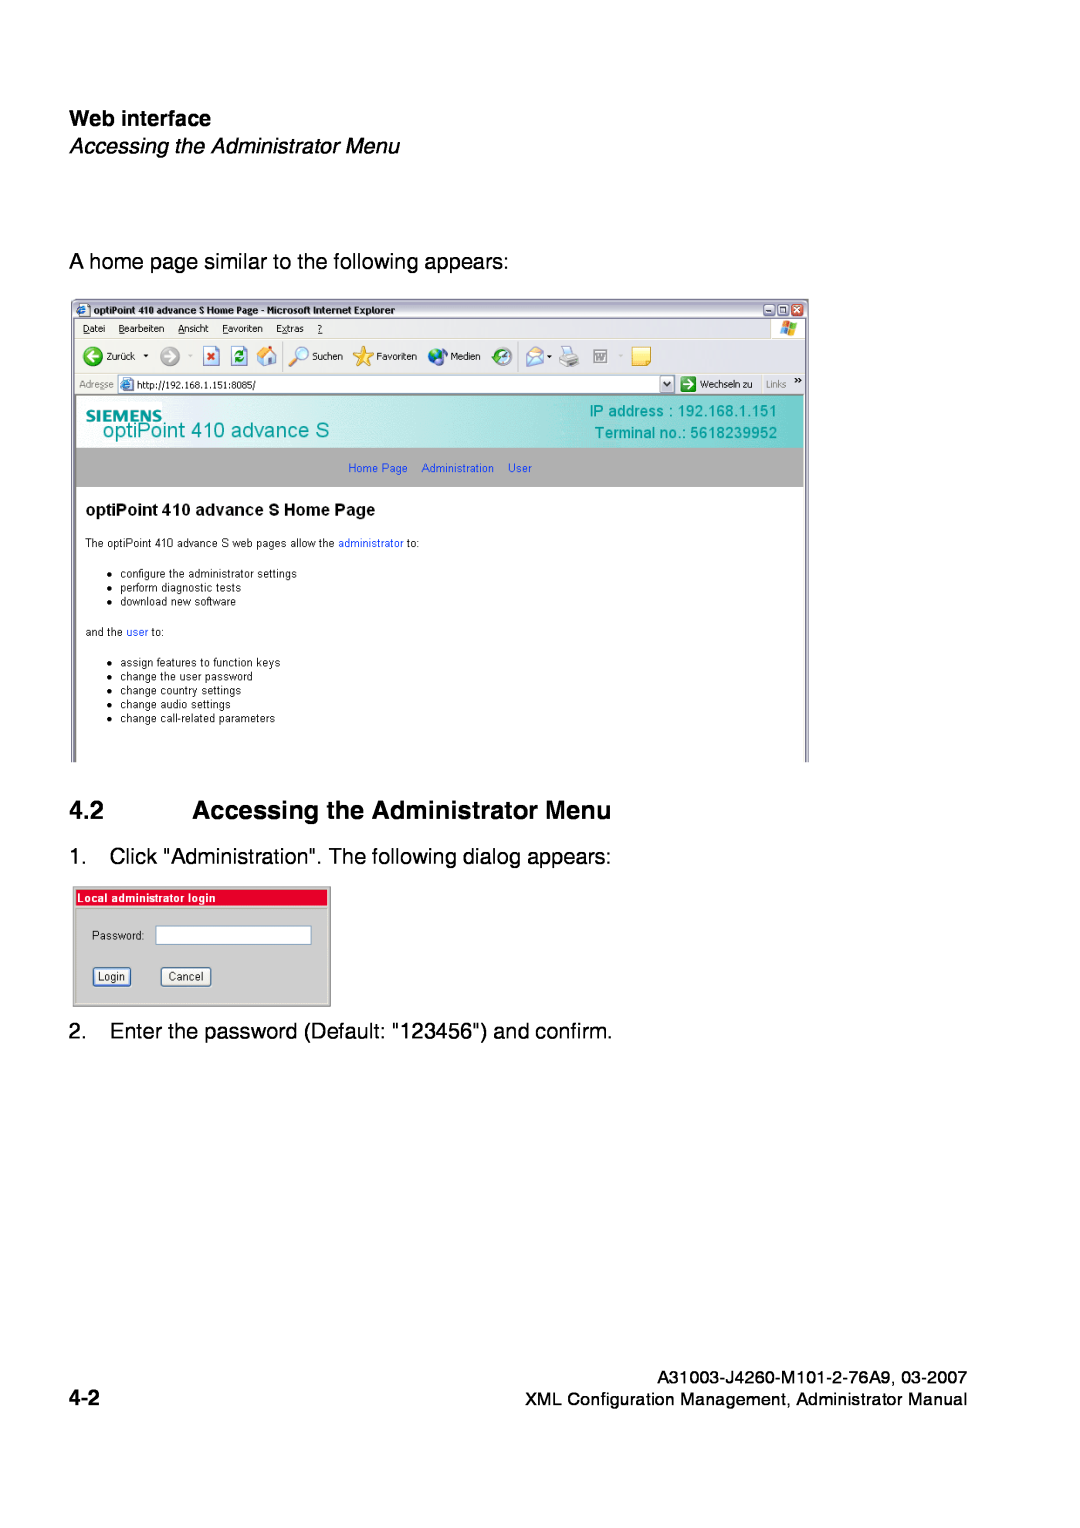 Siemens 420 S V6.0 manual Accessing the Administrator Menu, Web interface, A home page similar to the following appears 